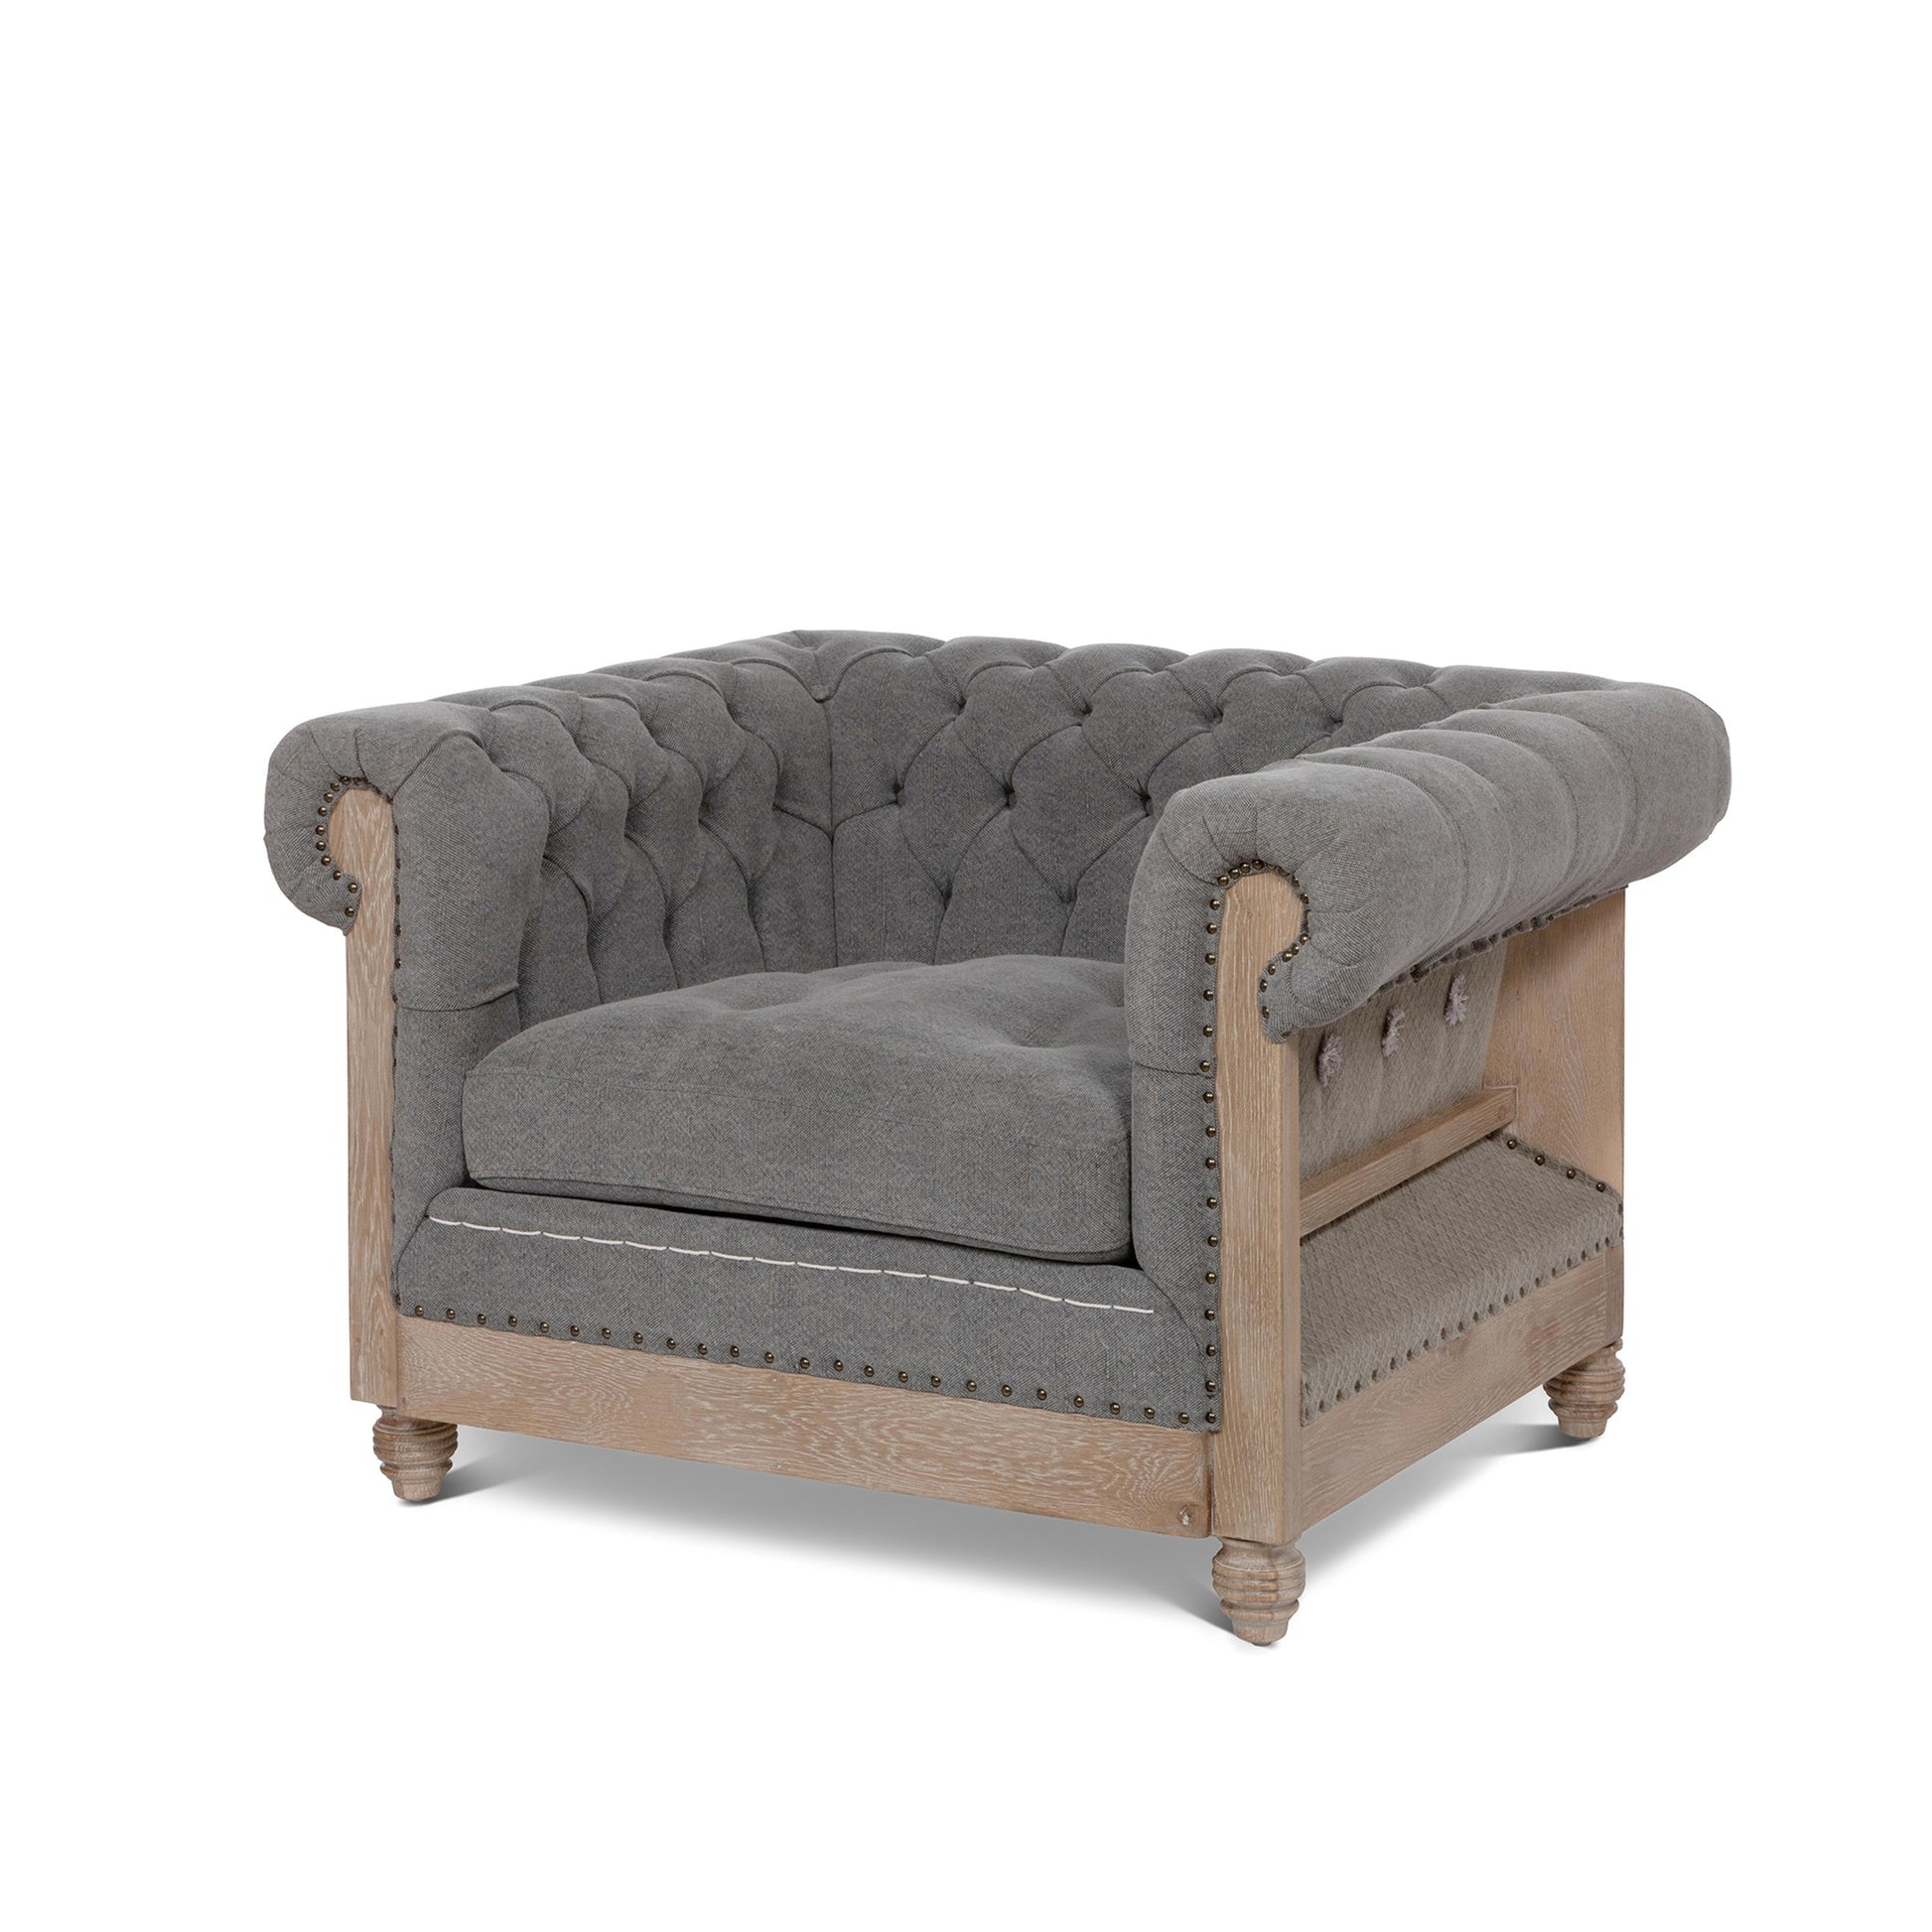 the-chamiree-chesterfield-chair-chair-park-hill-Threadbare Gypsy Soul